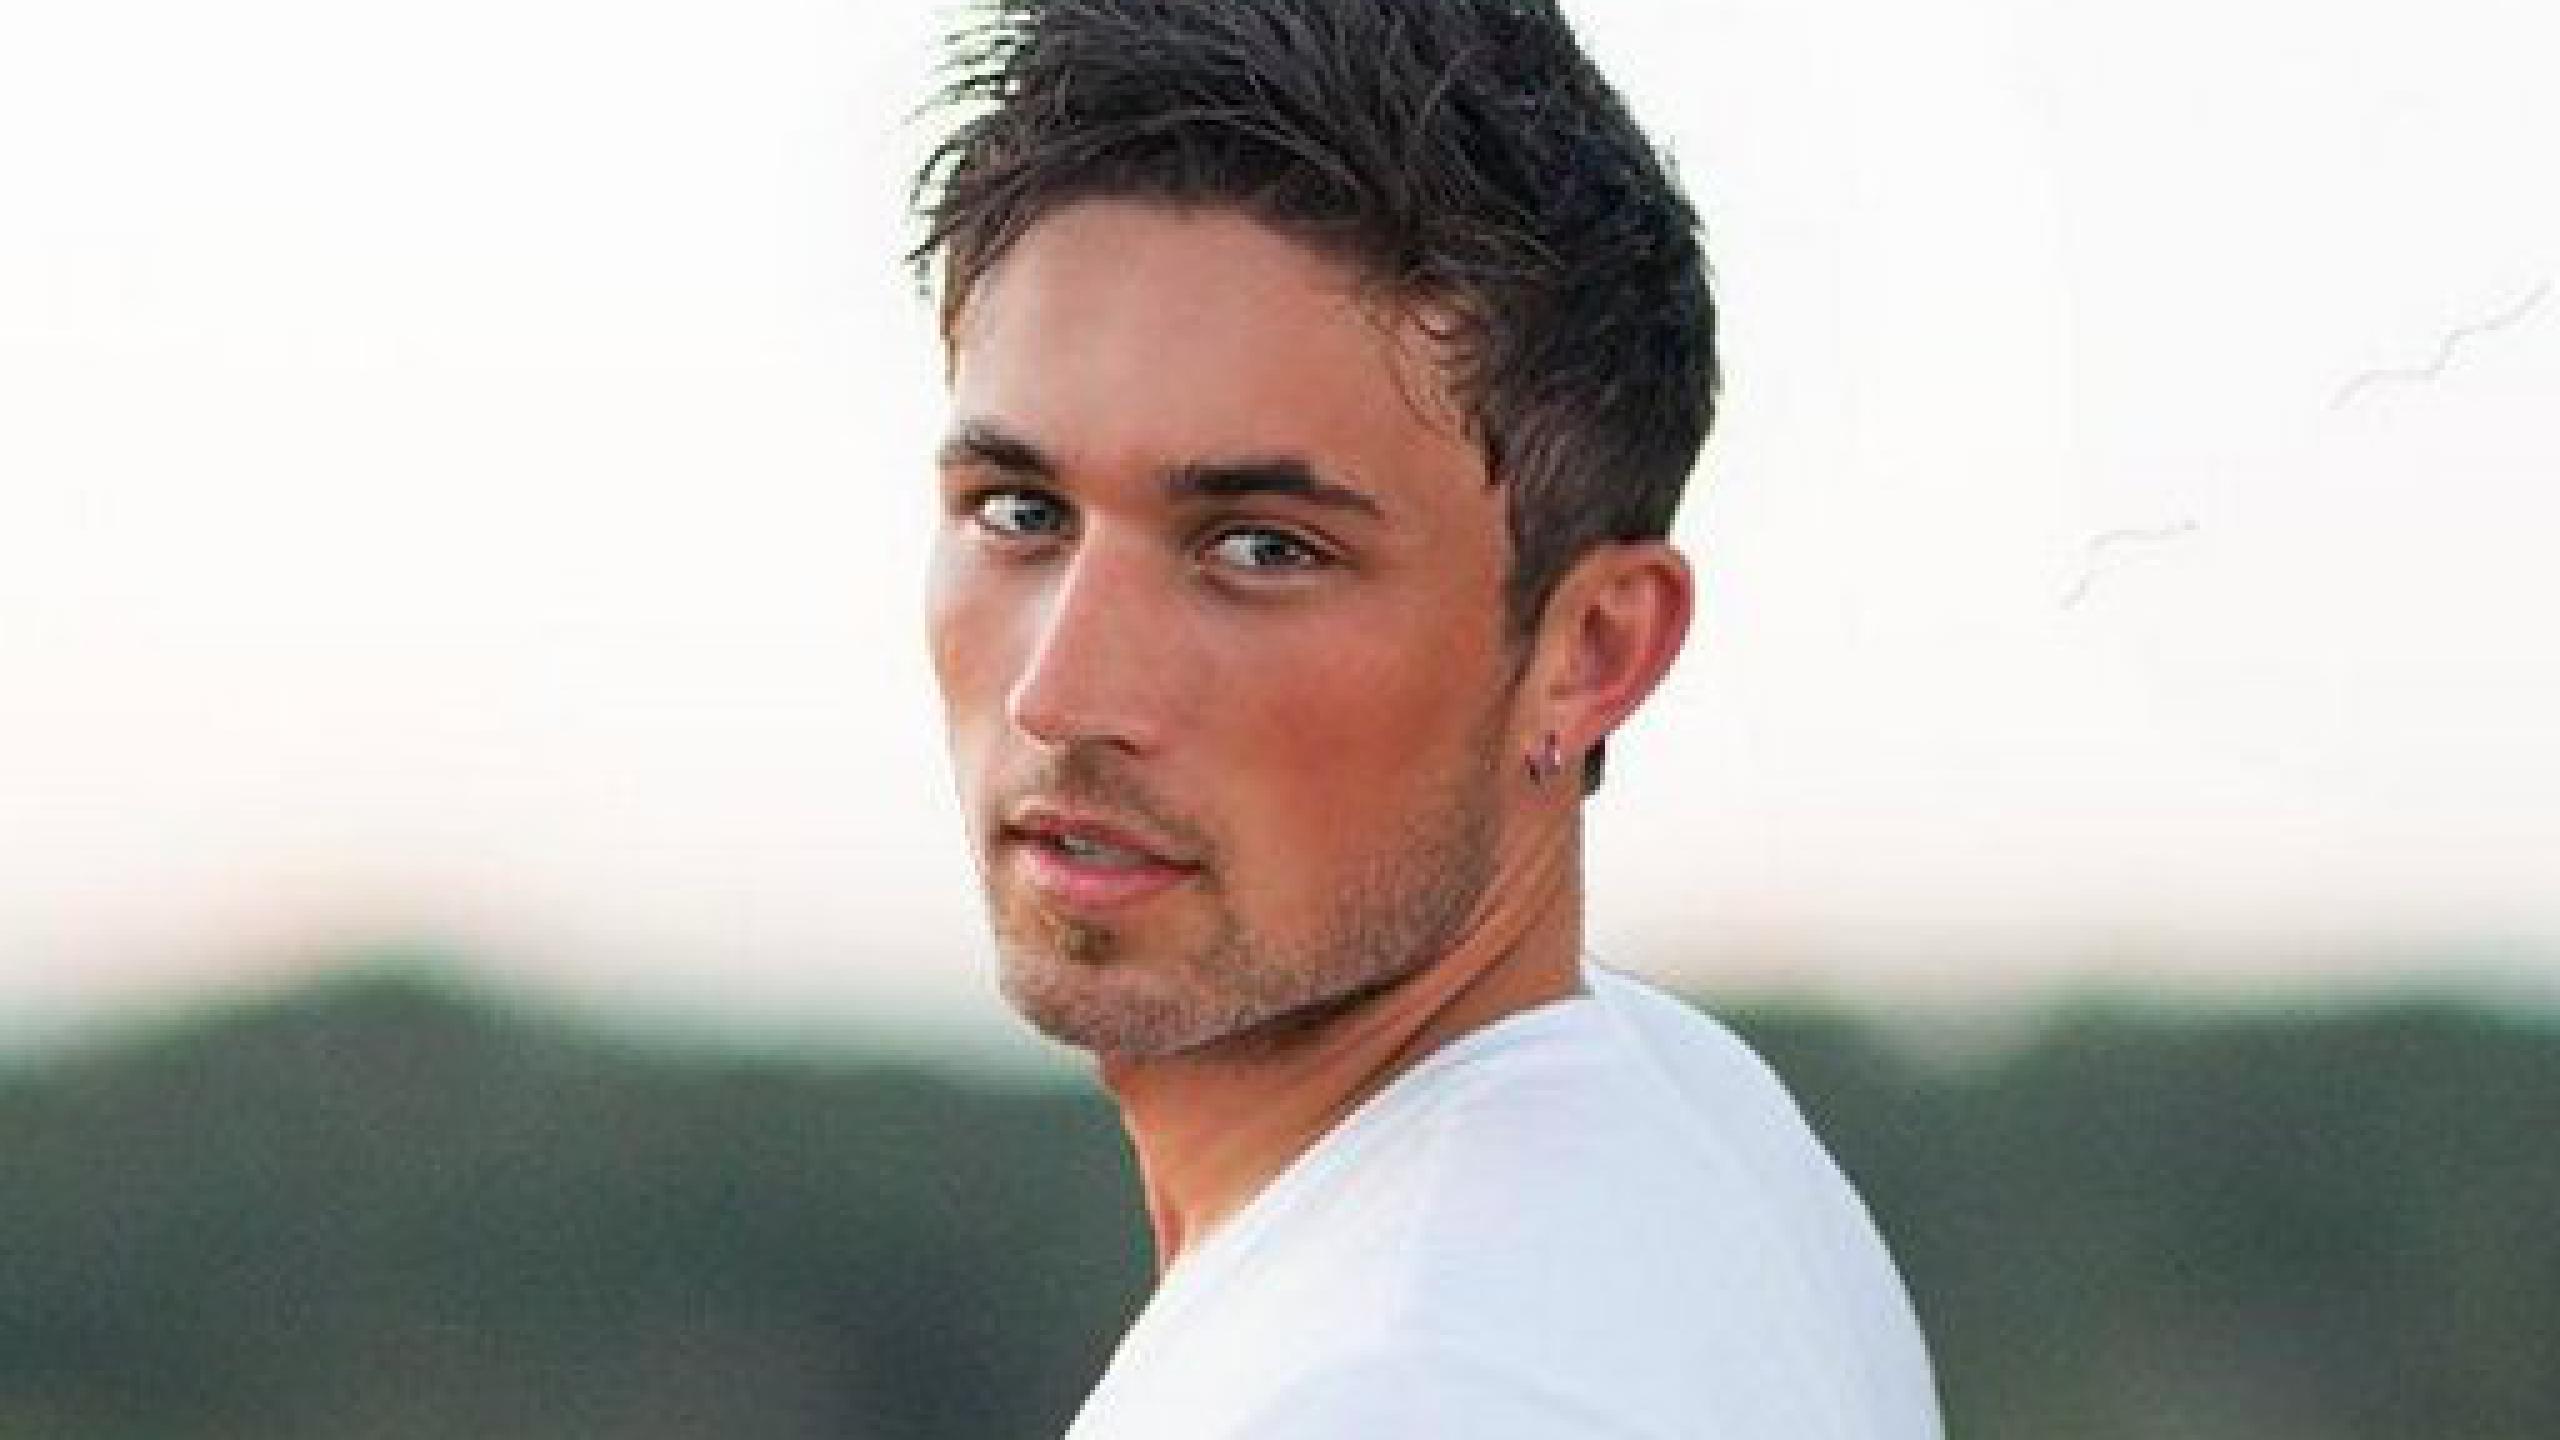 Michael Ray tour dates 2020 2021. Michael Ray tickets